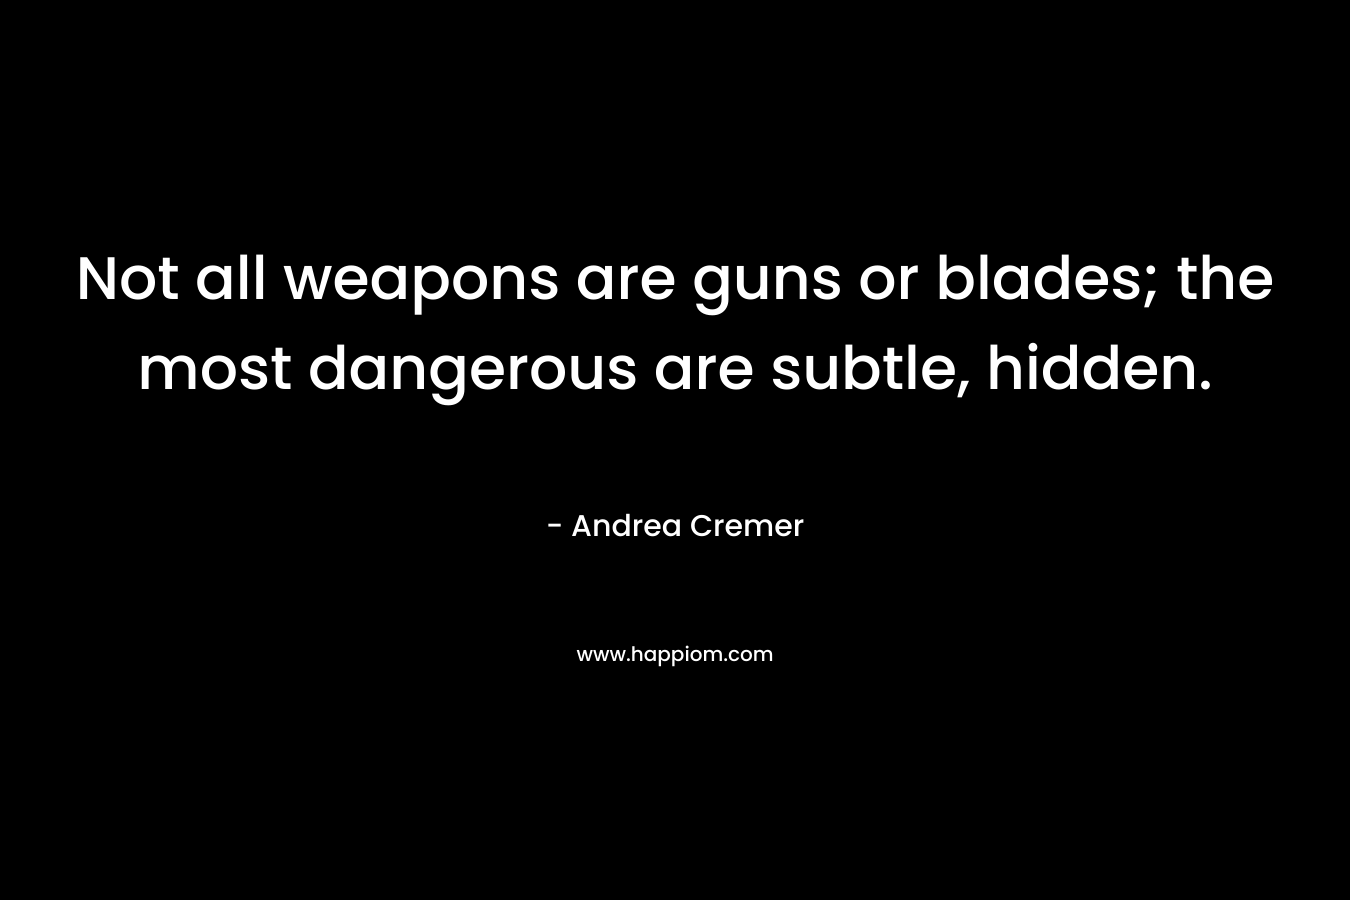 Not all weapons are guns or blades; the most dangerous are subtle, hidden. – Andrea Cremer